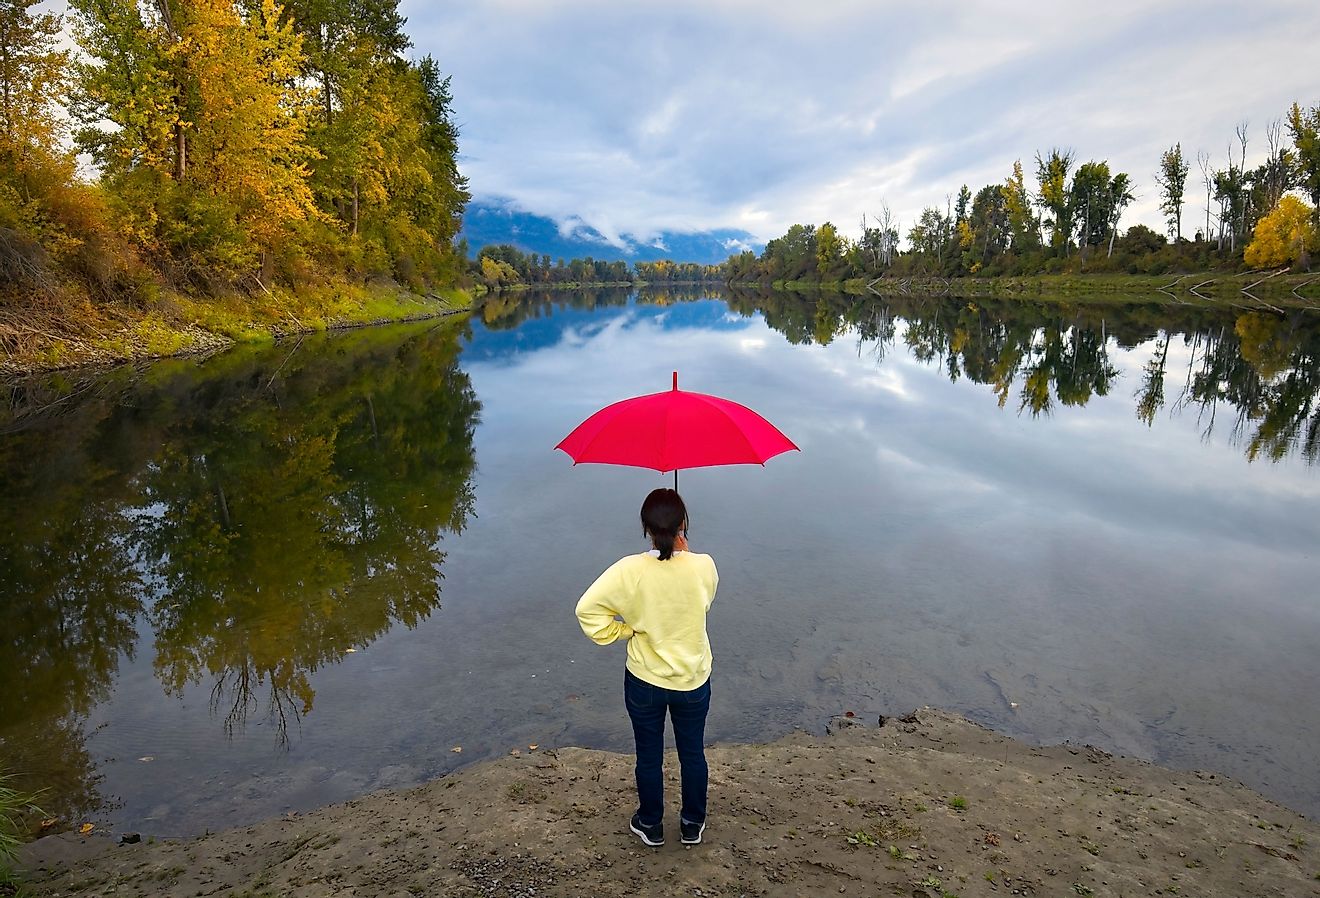 A woman holding a red umbrella stands on the shores by the calm Kootenai River near Bonners Ferry, Idaho.